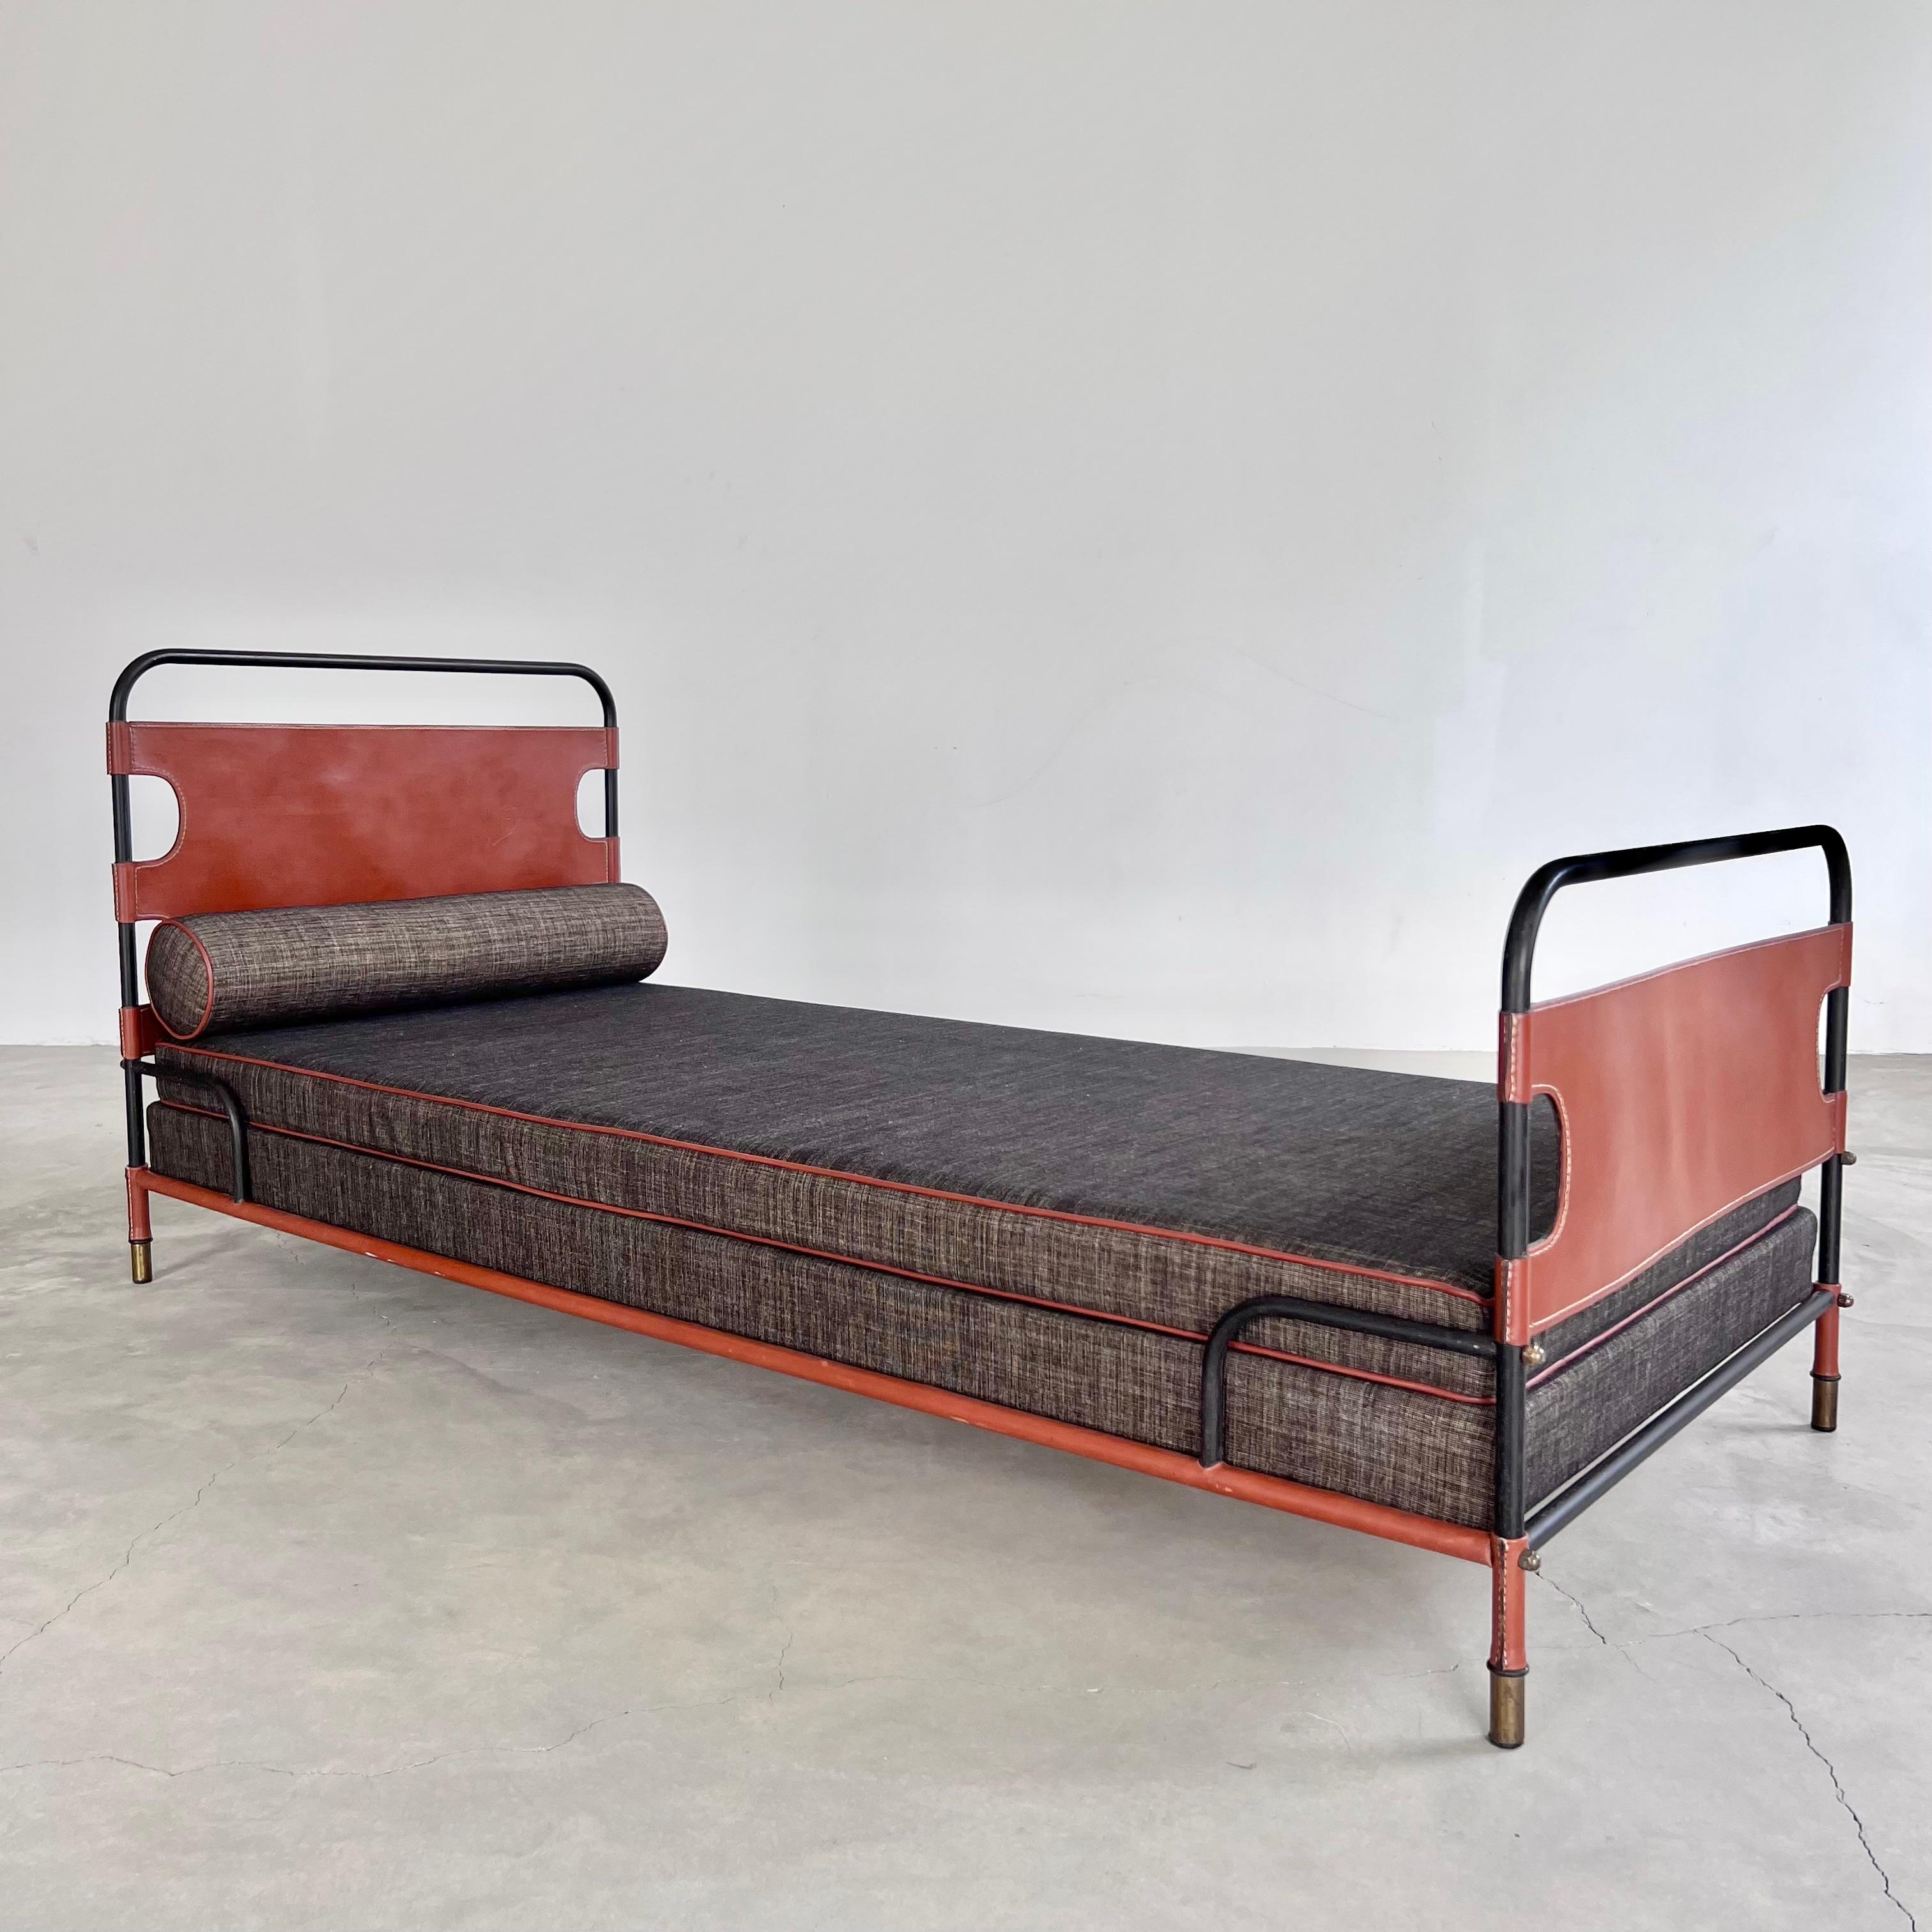 Exceptional leather and oak daybed by Jacques Adnet. The entire frame is wrapped in dark green leather with signature Adnet contrast stitching and brass hardware. Cane style paneling on all sides. Only the two crossbars underneath the bed are not